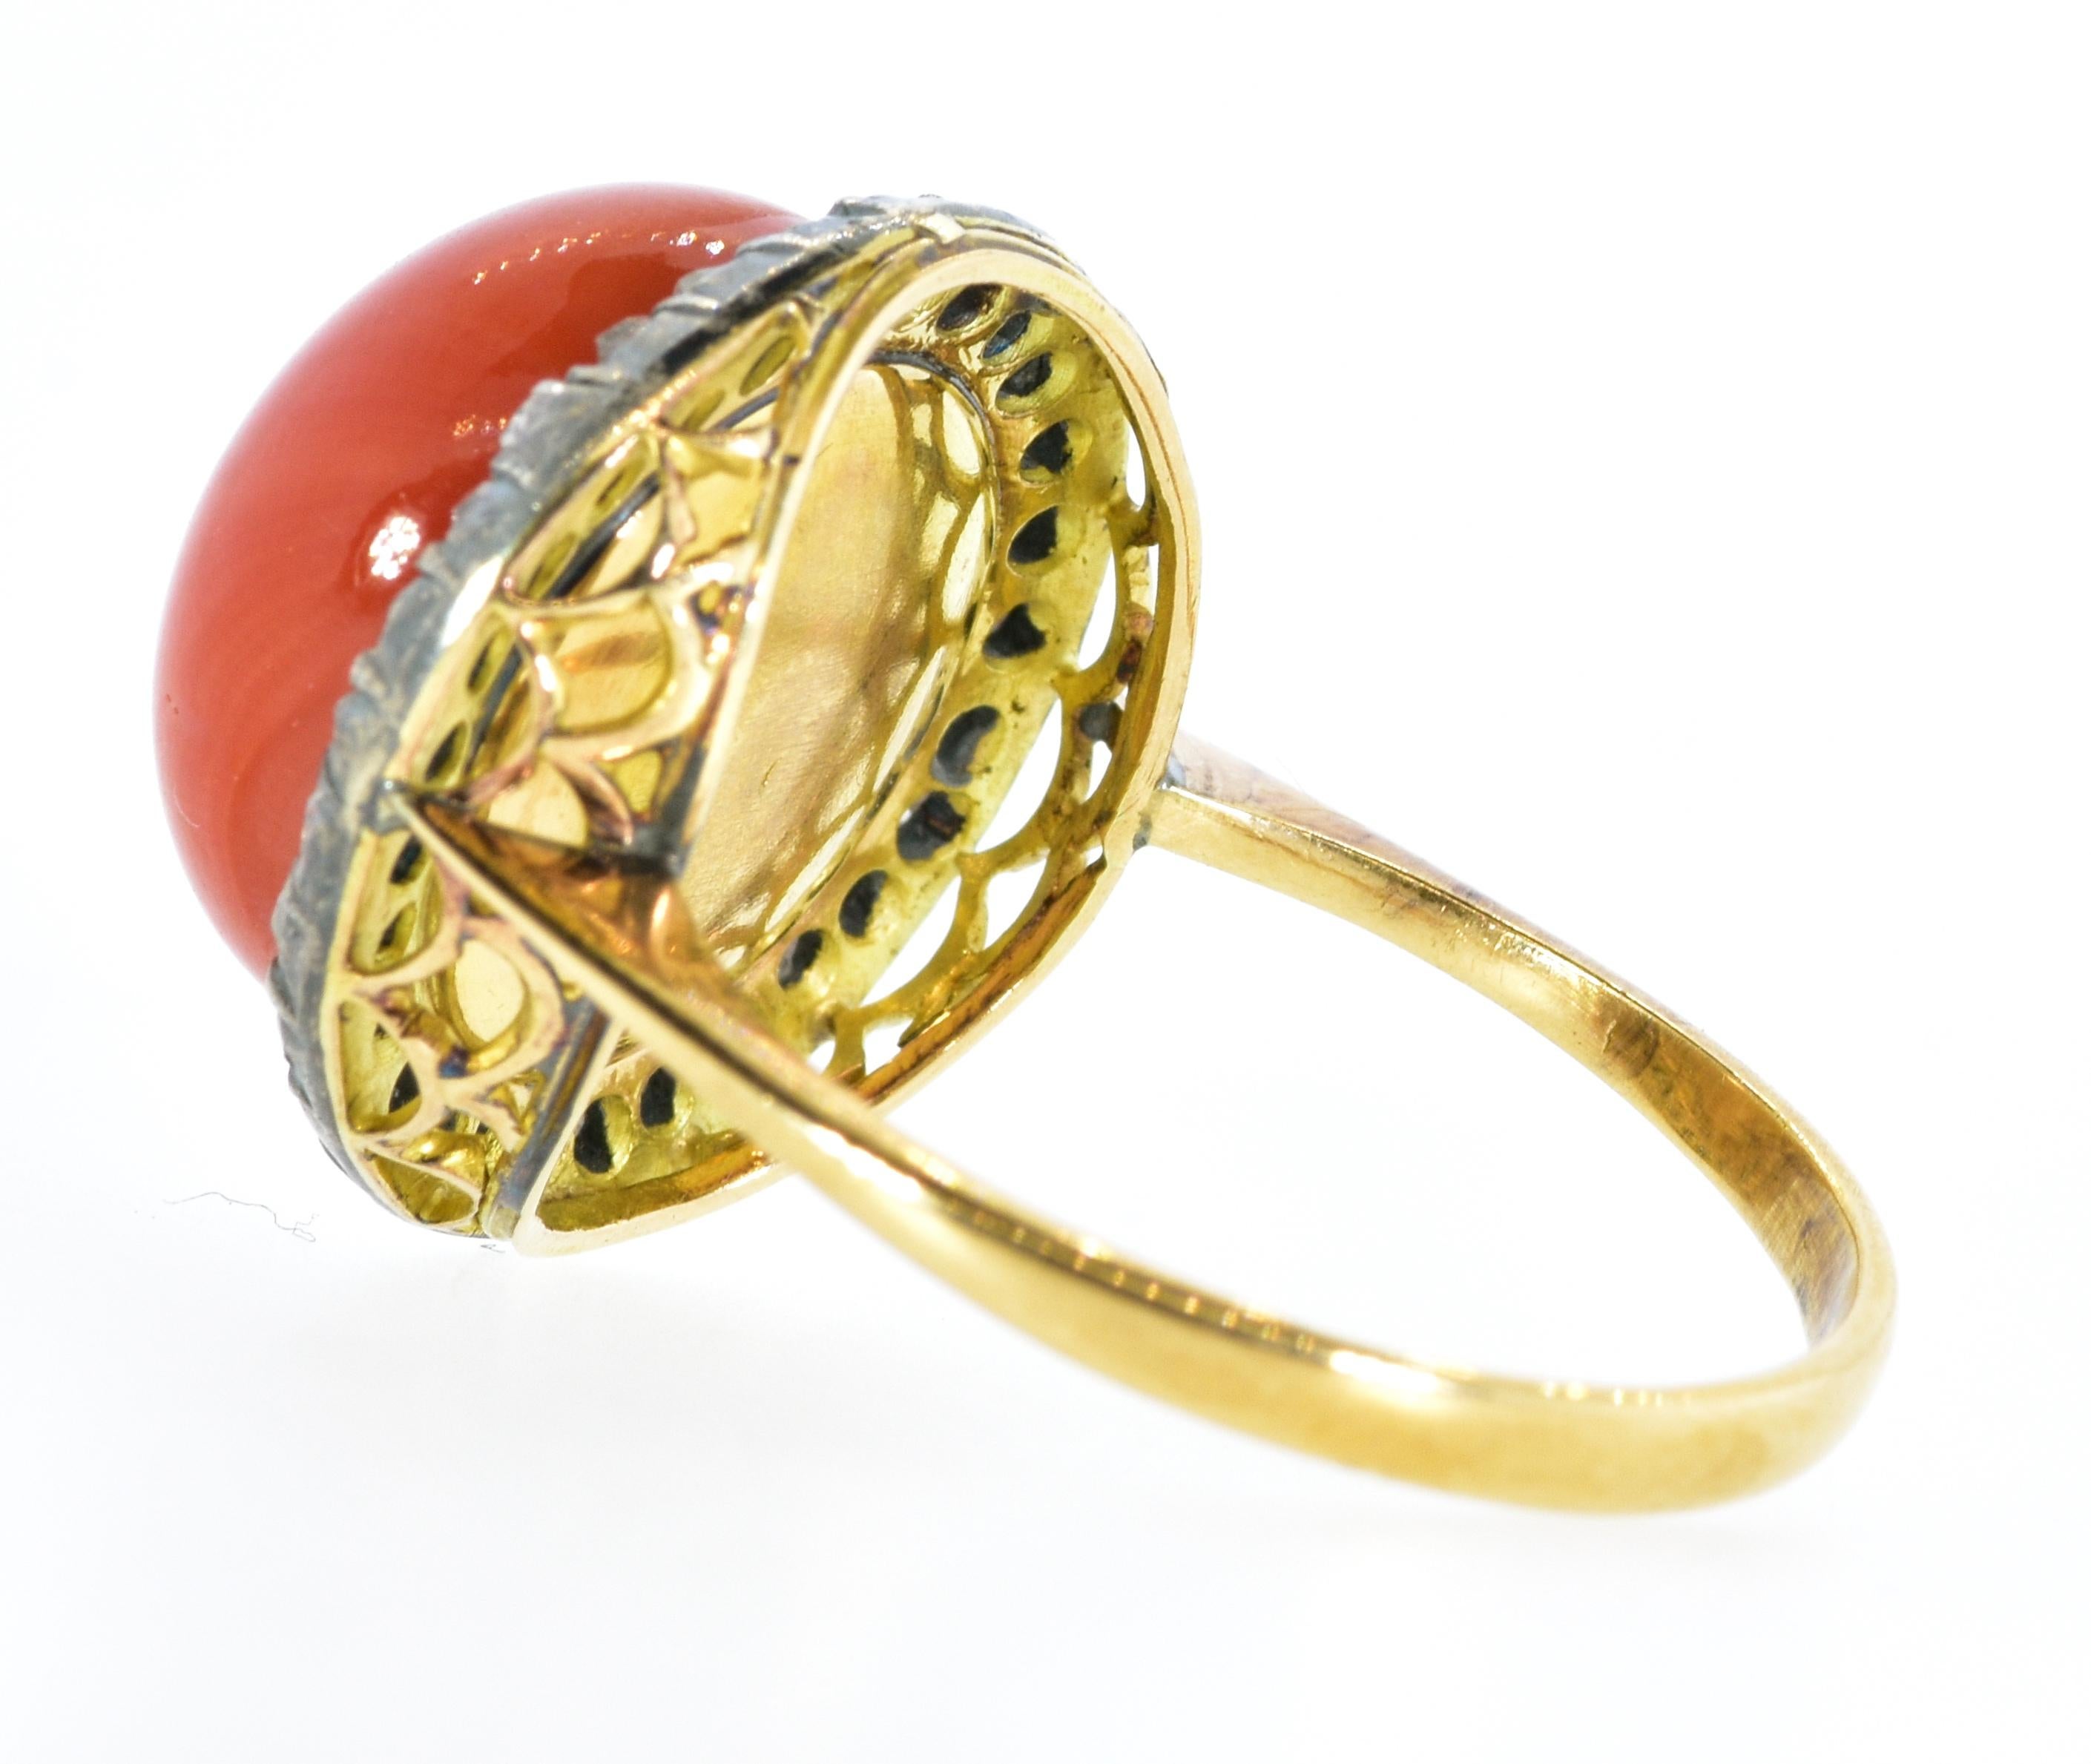 Women's or Men's Antique Natural Coral and Diamond Ring, circa 1870